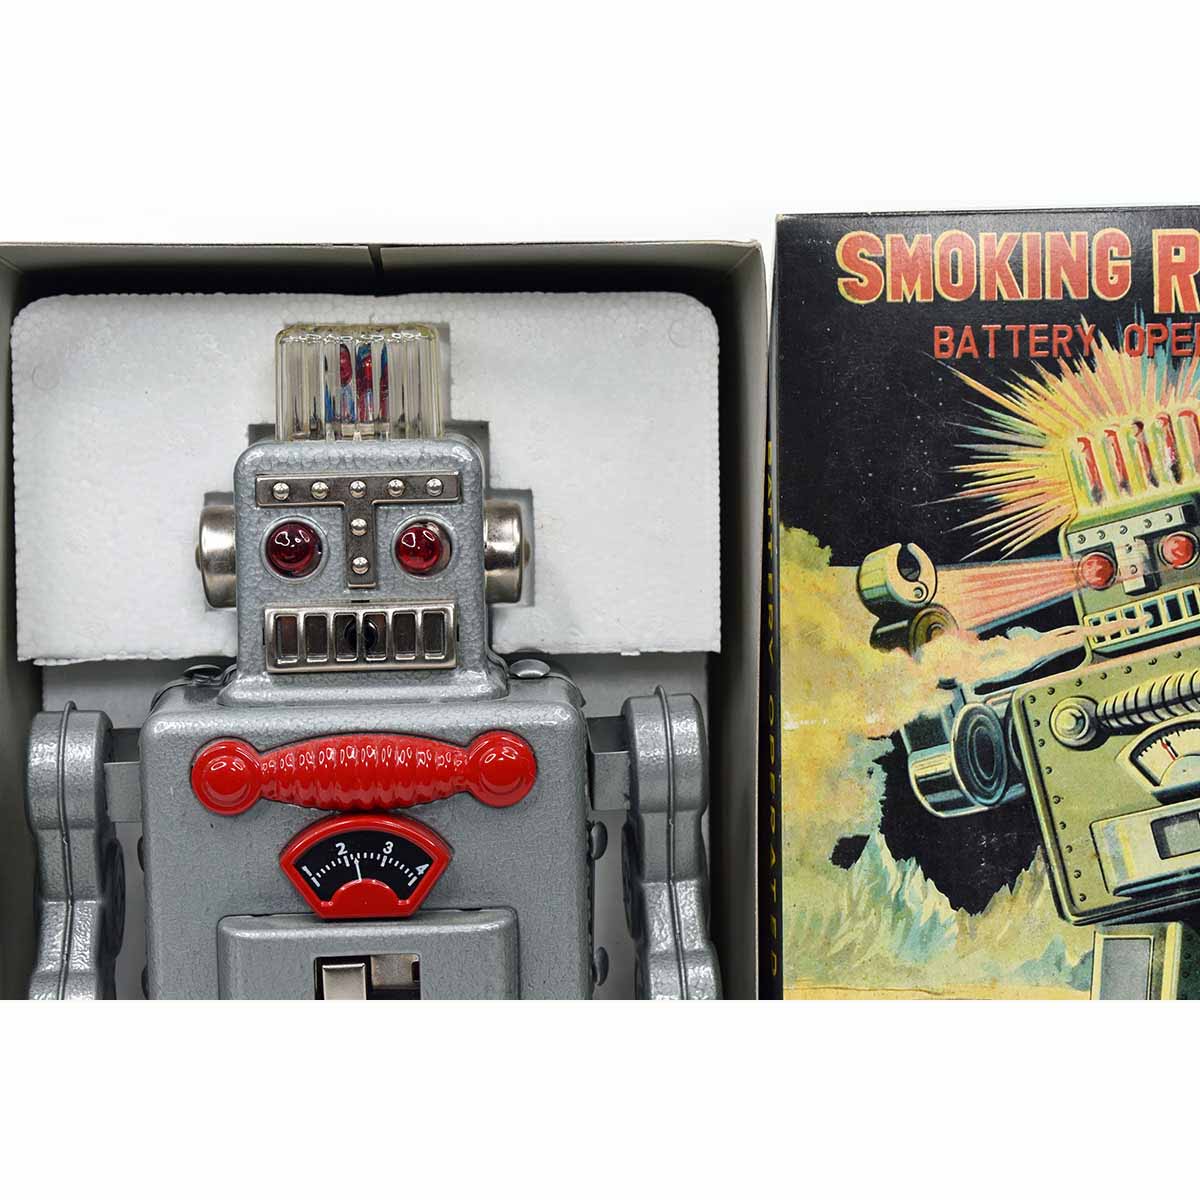 BLUE GREEN or GREY  Battery Operated Robot SMOKING  ROBOT SPACEMAN HAHA TOY! 